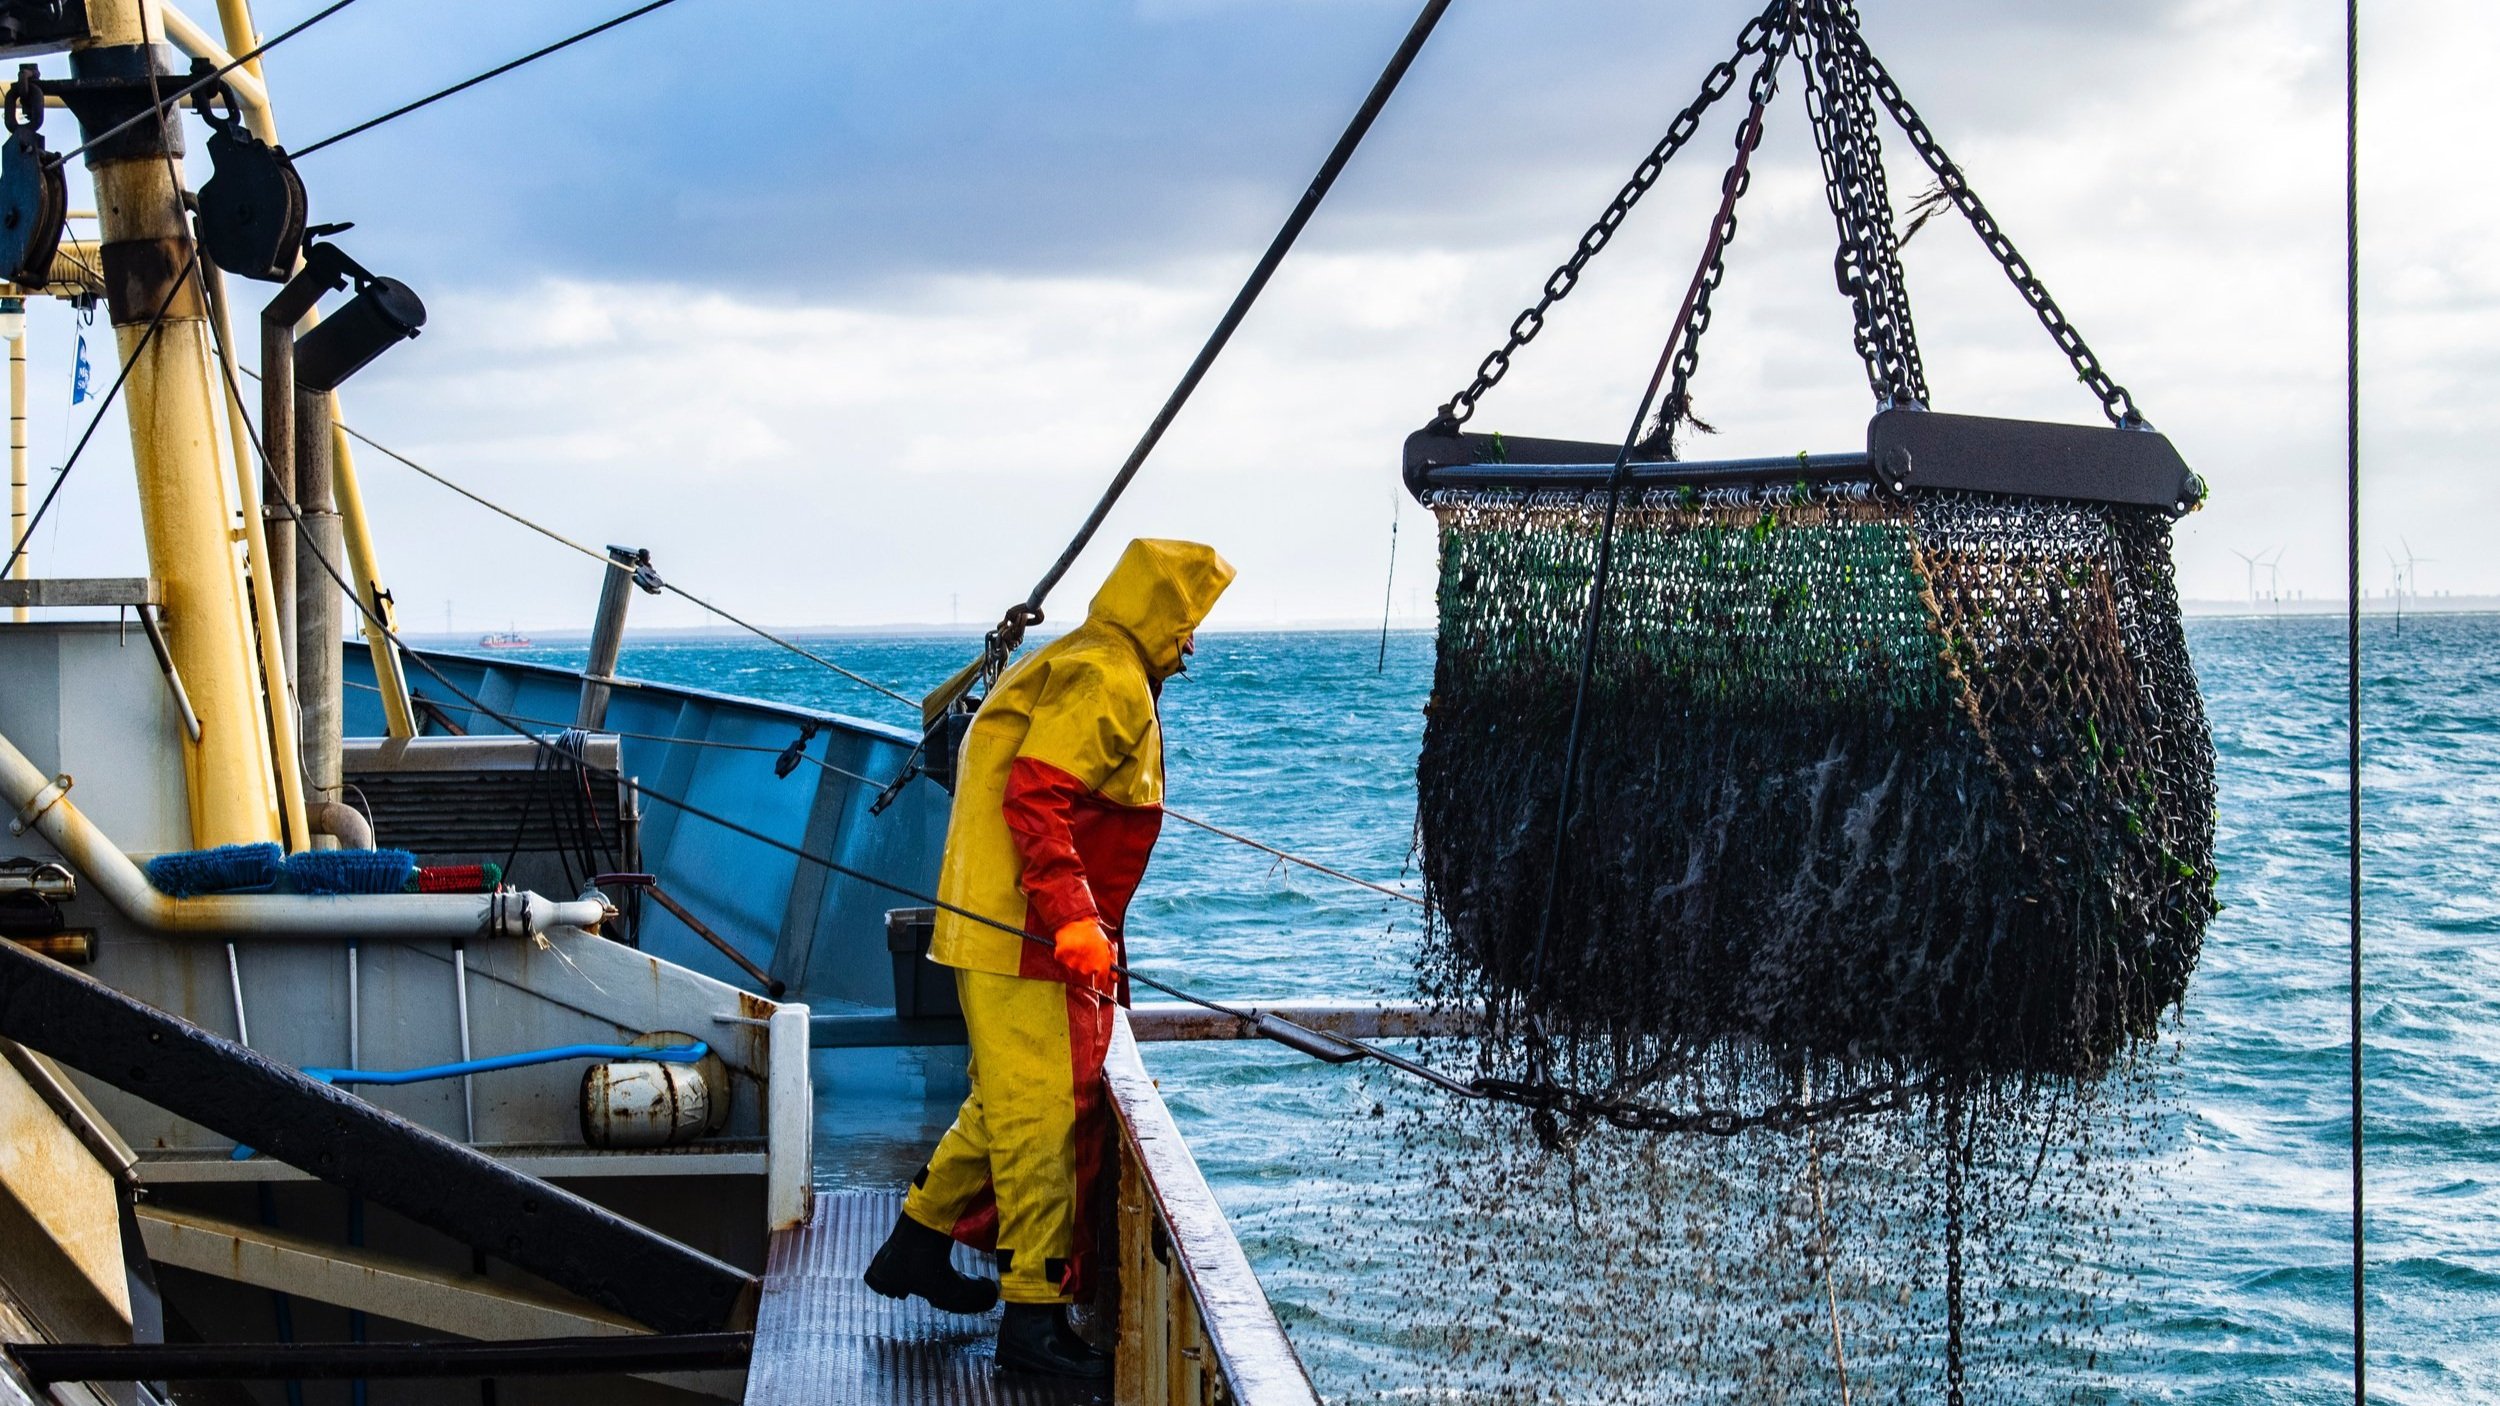 https://images.squarespace-cdn.com/content/v1/5e4ebcff4fc9cb50eb28ce75/72883451-aea4-4a67-8021-bd879ab50349/The+Fishing+Industry%E2%80%99s+High+Tech+Transition+to+Sustainability++-+Rye+Strategy+Blog